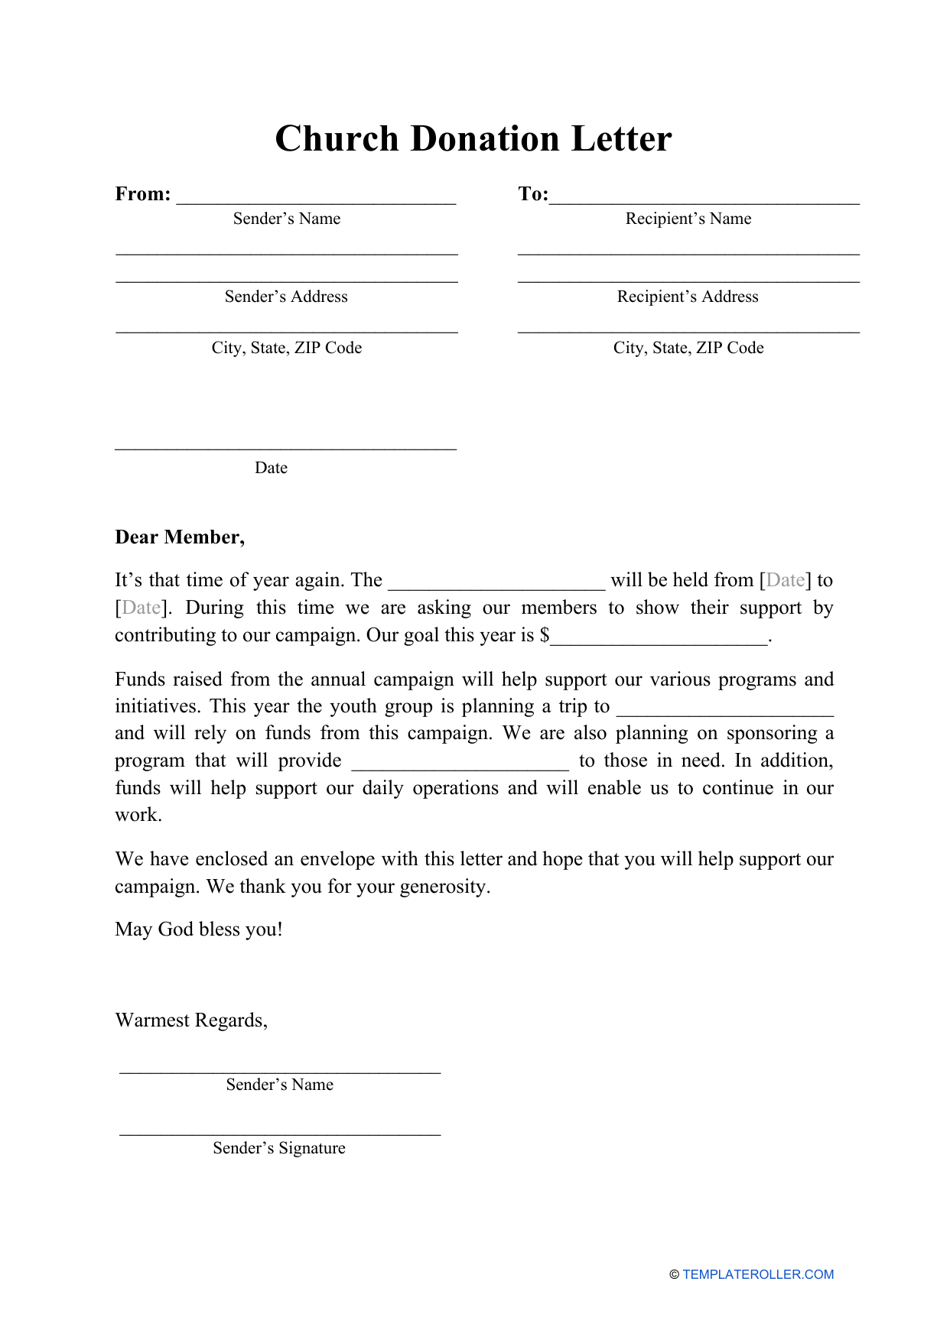 church-donation-letter-template-fill-out-sign-online-and-download